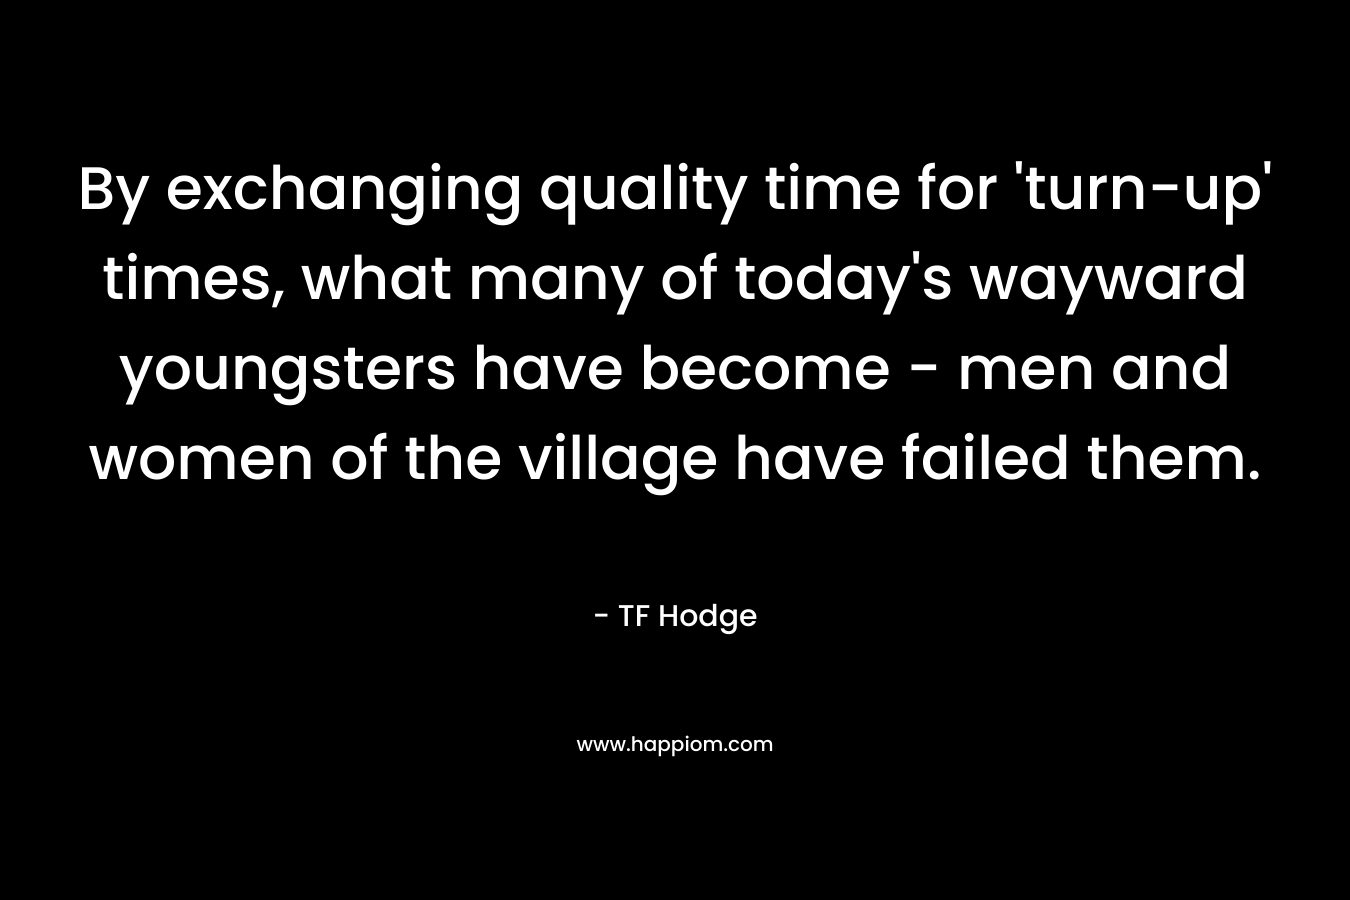 By exchanging quality time for ‘turn-up’ times, what many of today’s wayward youngsters have become – men and women of the village have failed them. – TF Hodge